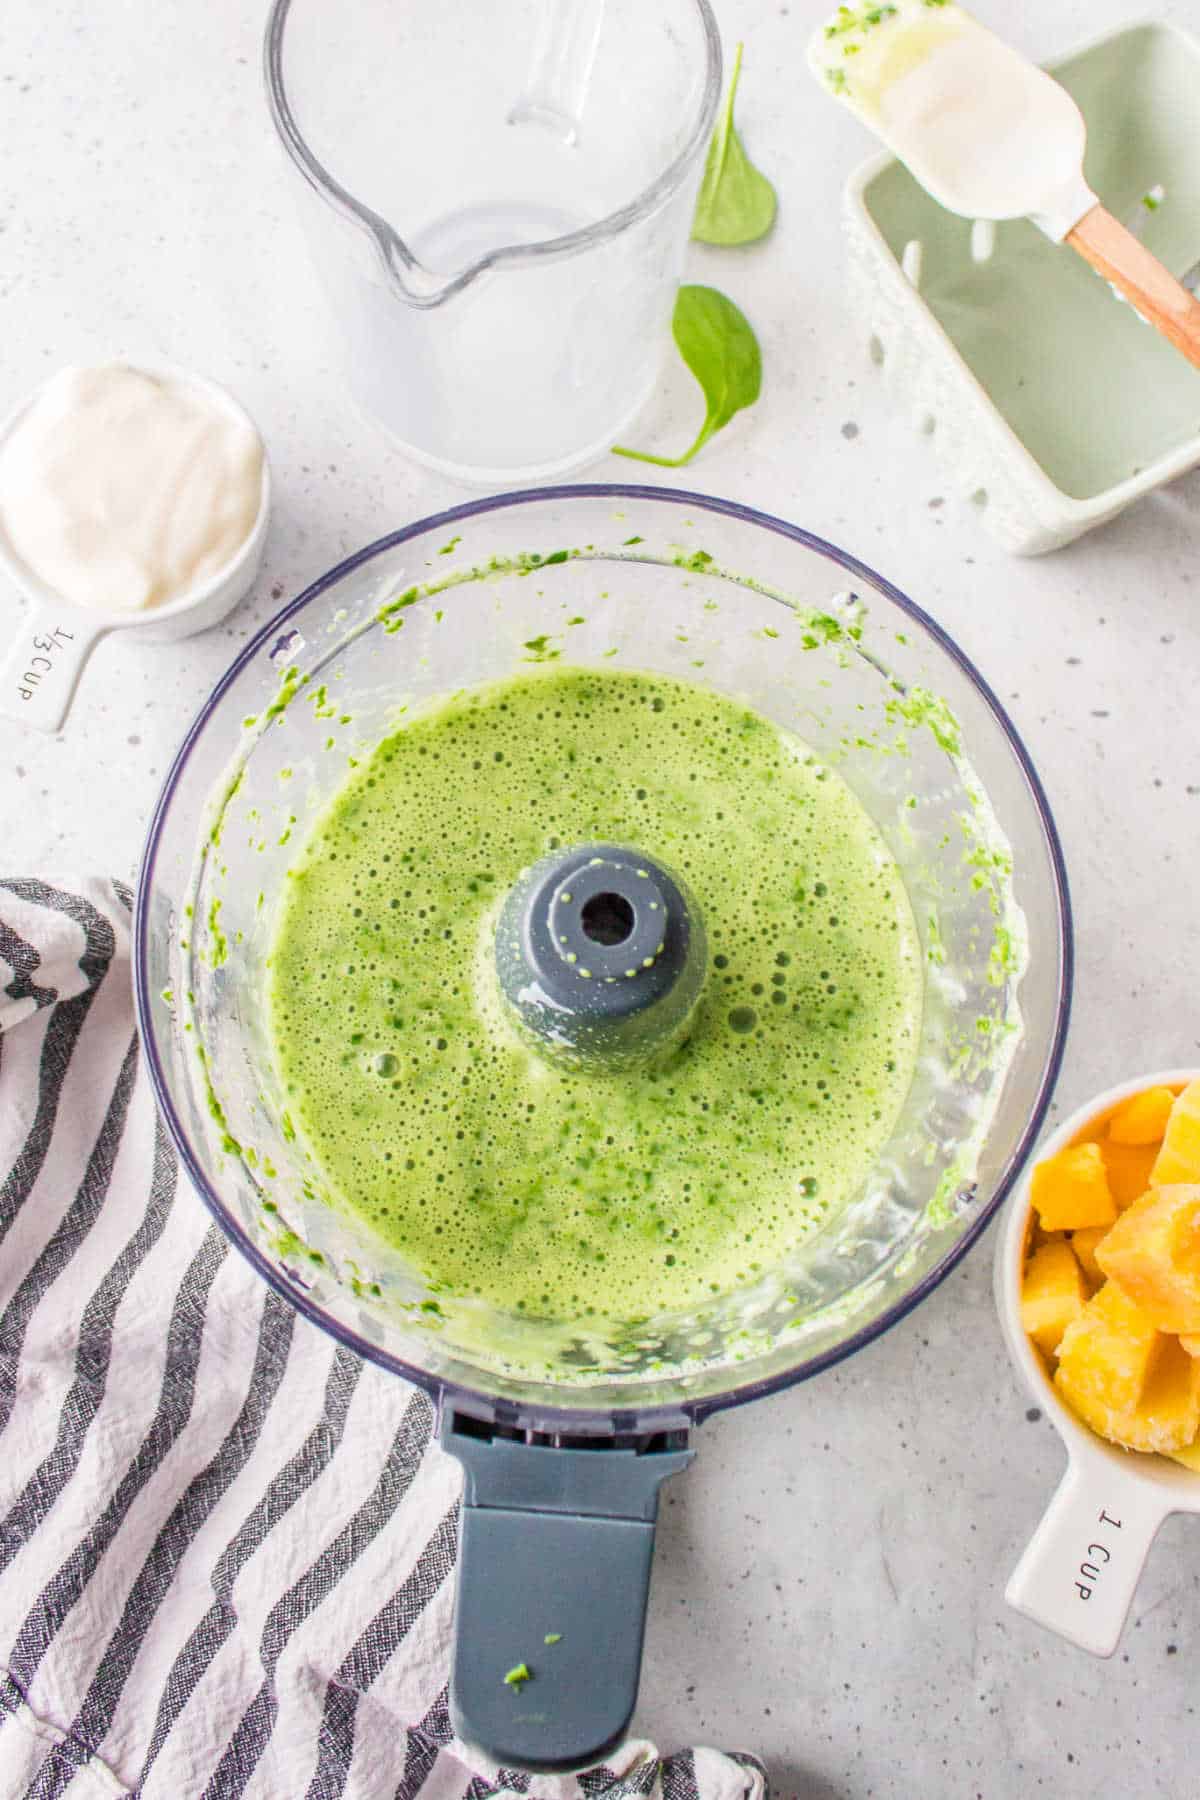 Spinach and almond milk blended together in a food processor. 